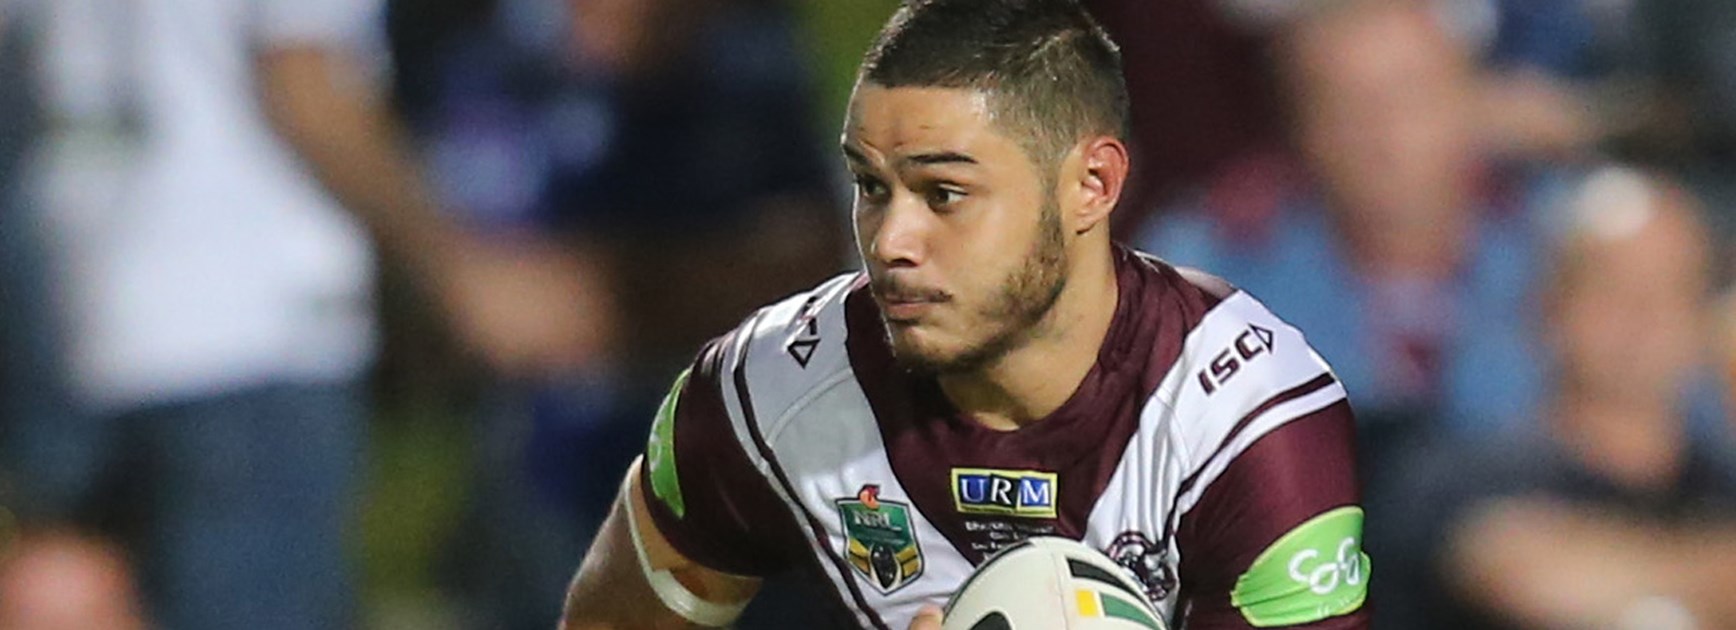 Manly winger Brayden Wiliame has finally been on the winning side in an NRL game.